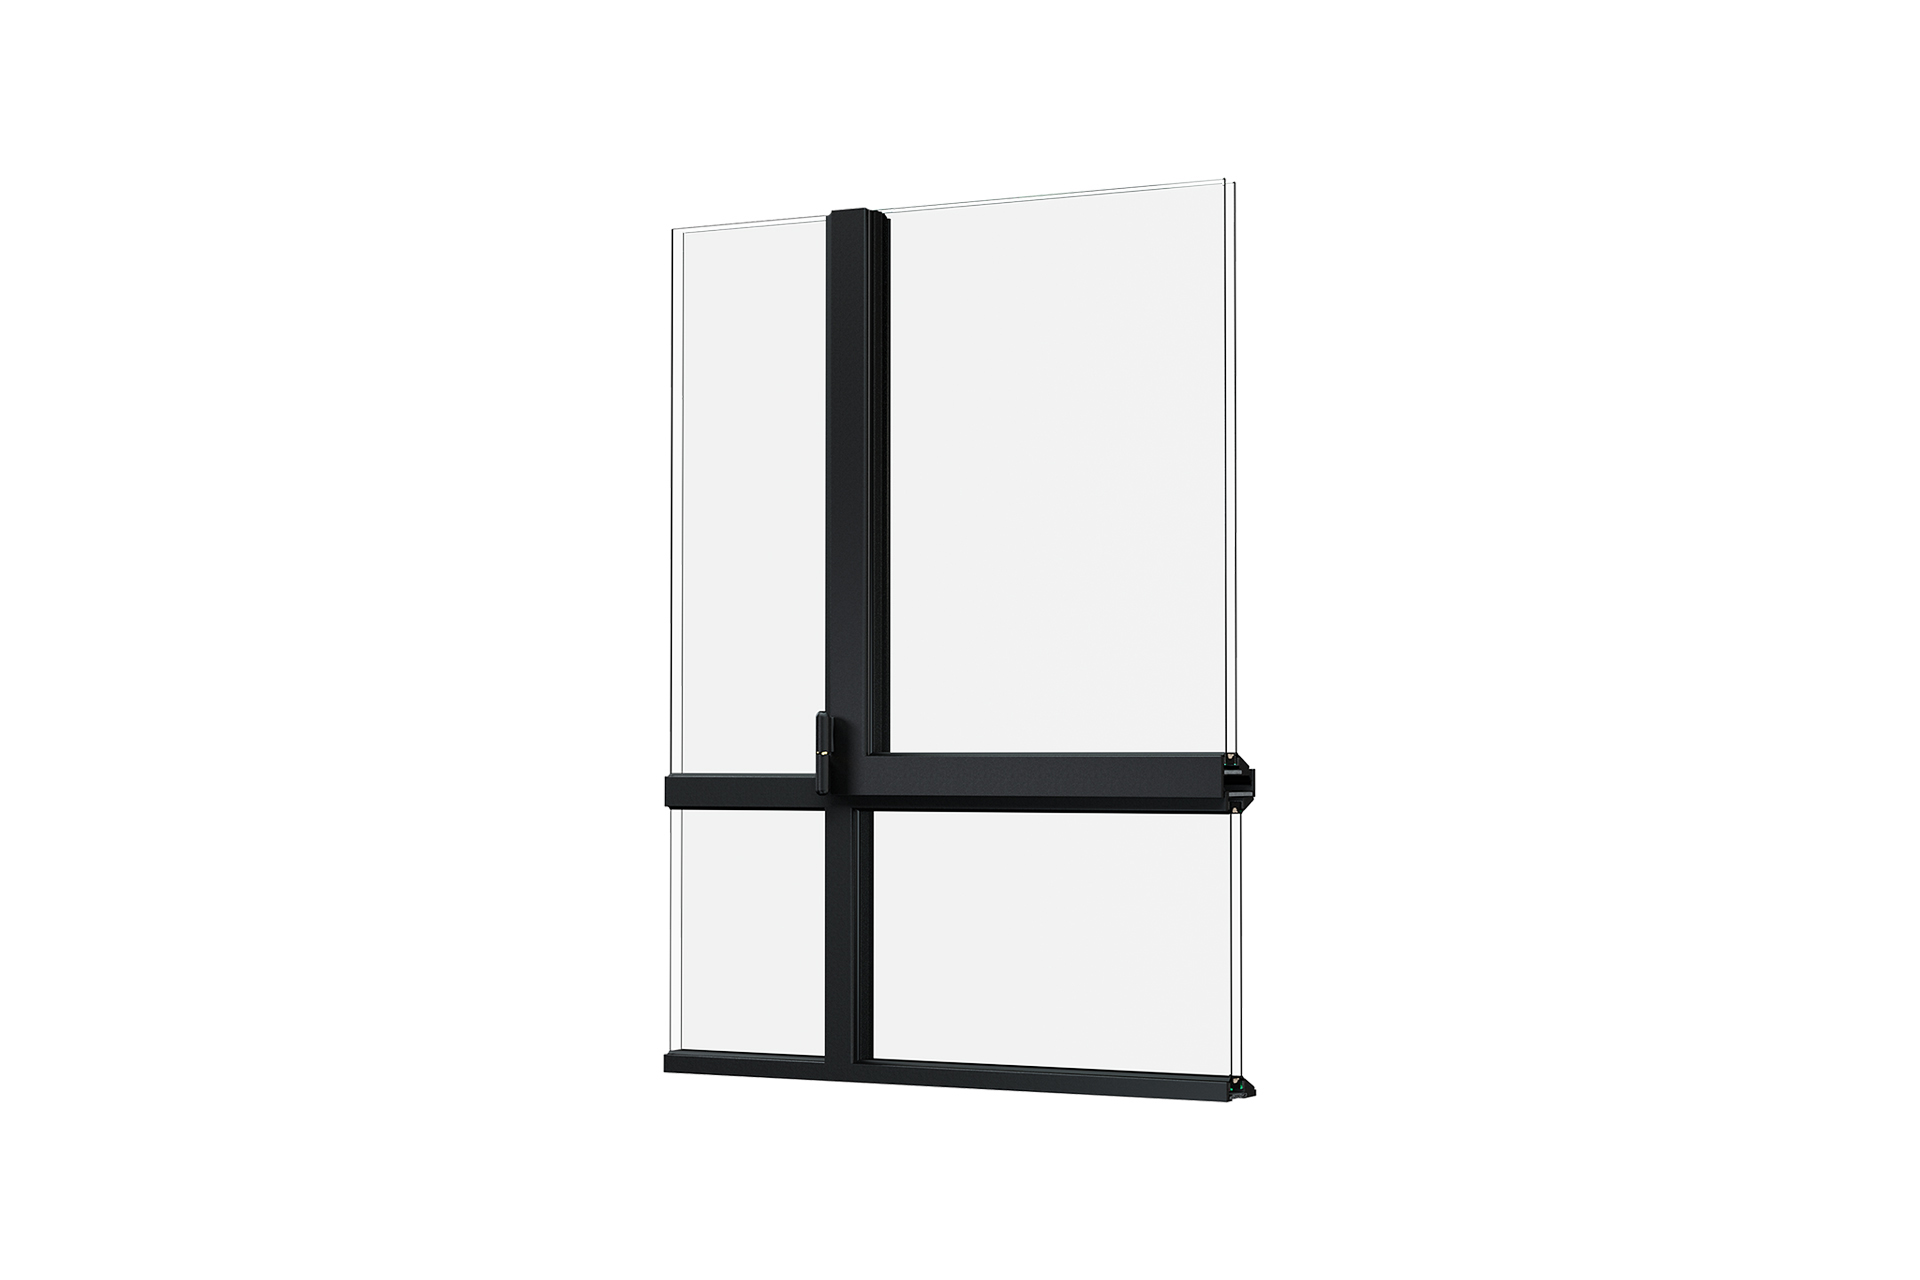 3D model of the CLASSIC-ISO-PLUS profile system in a mondriaan shape, front view